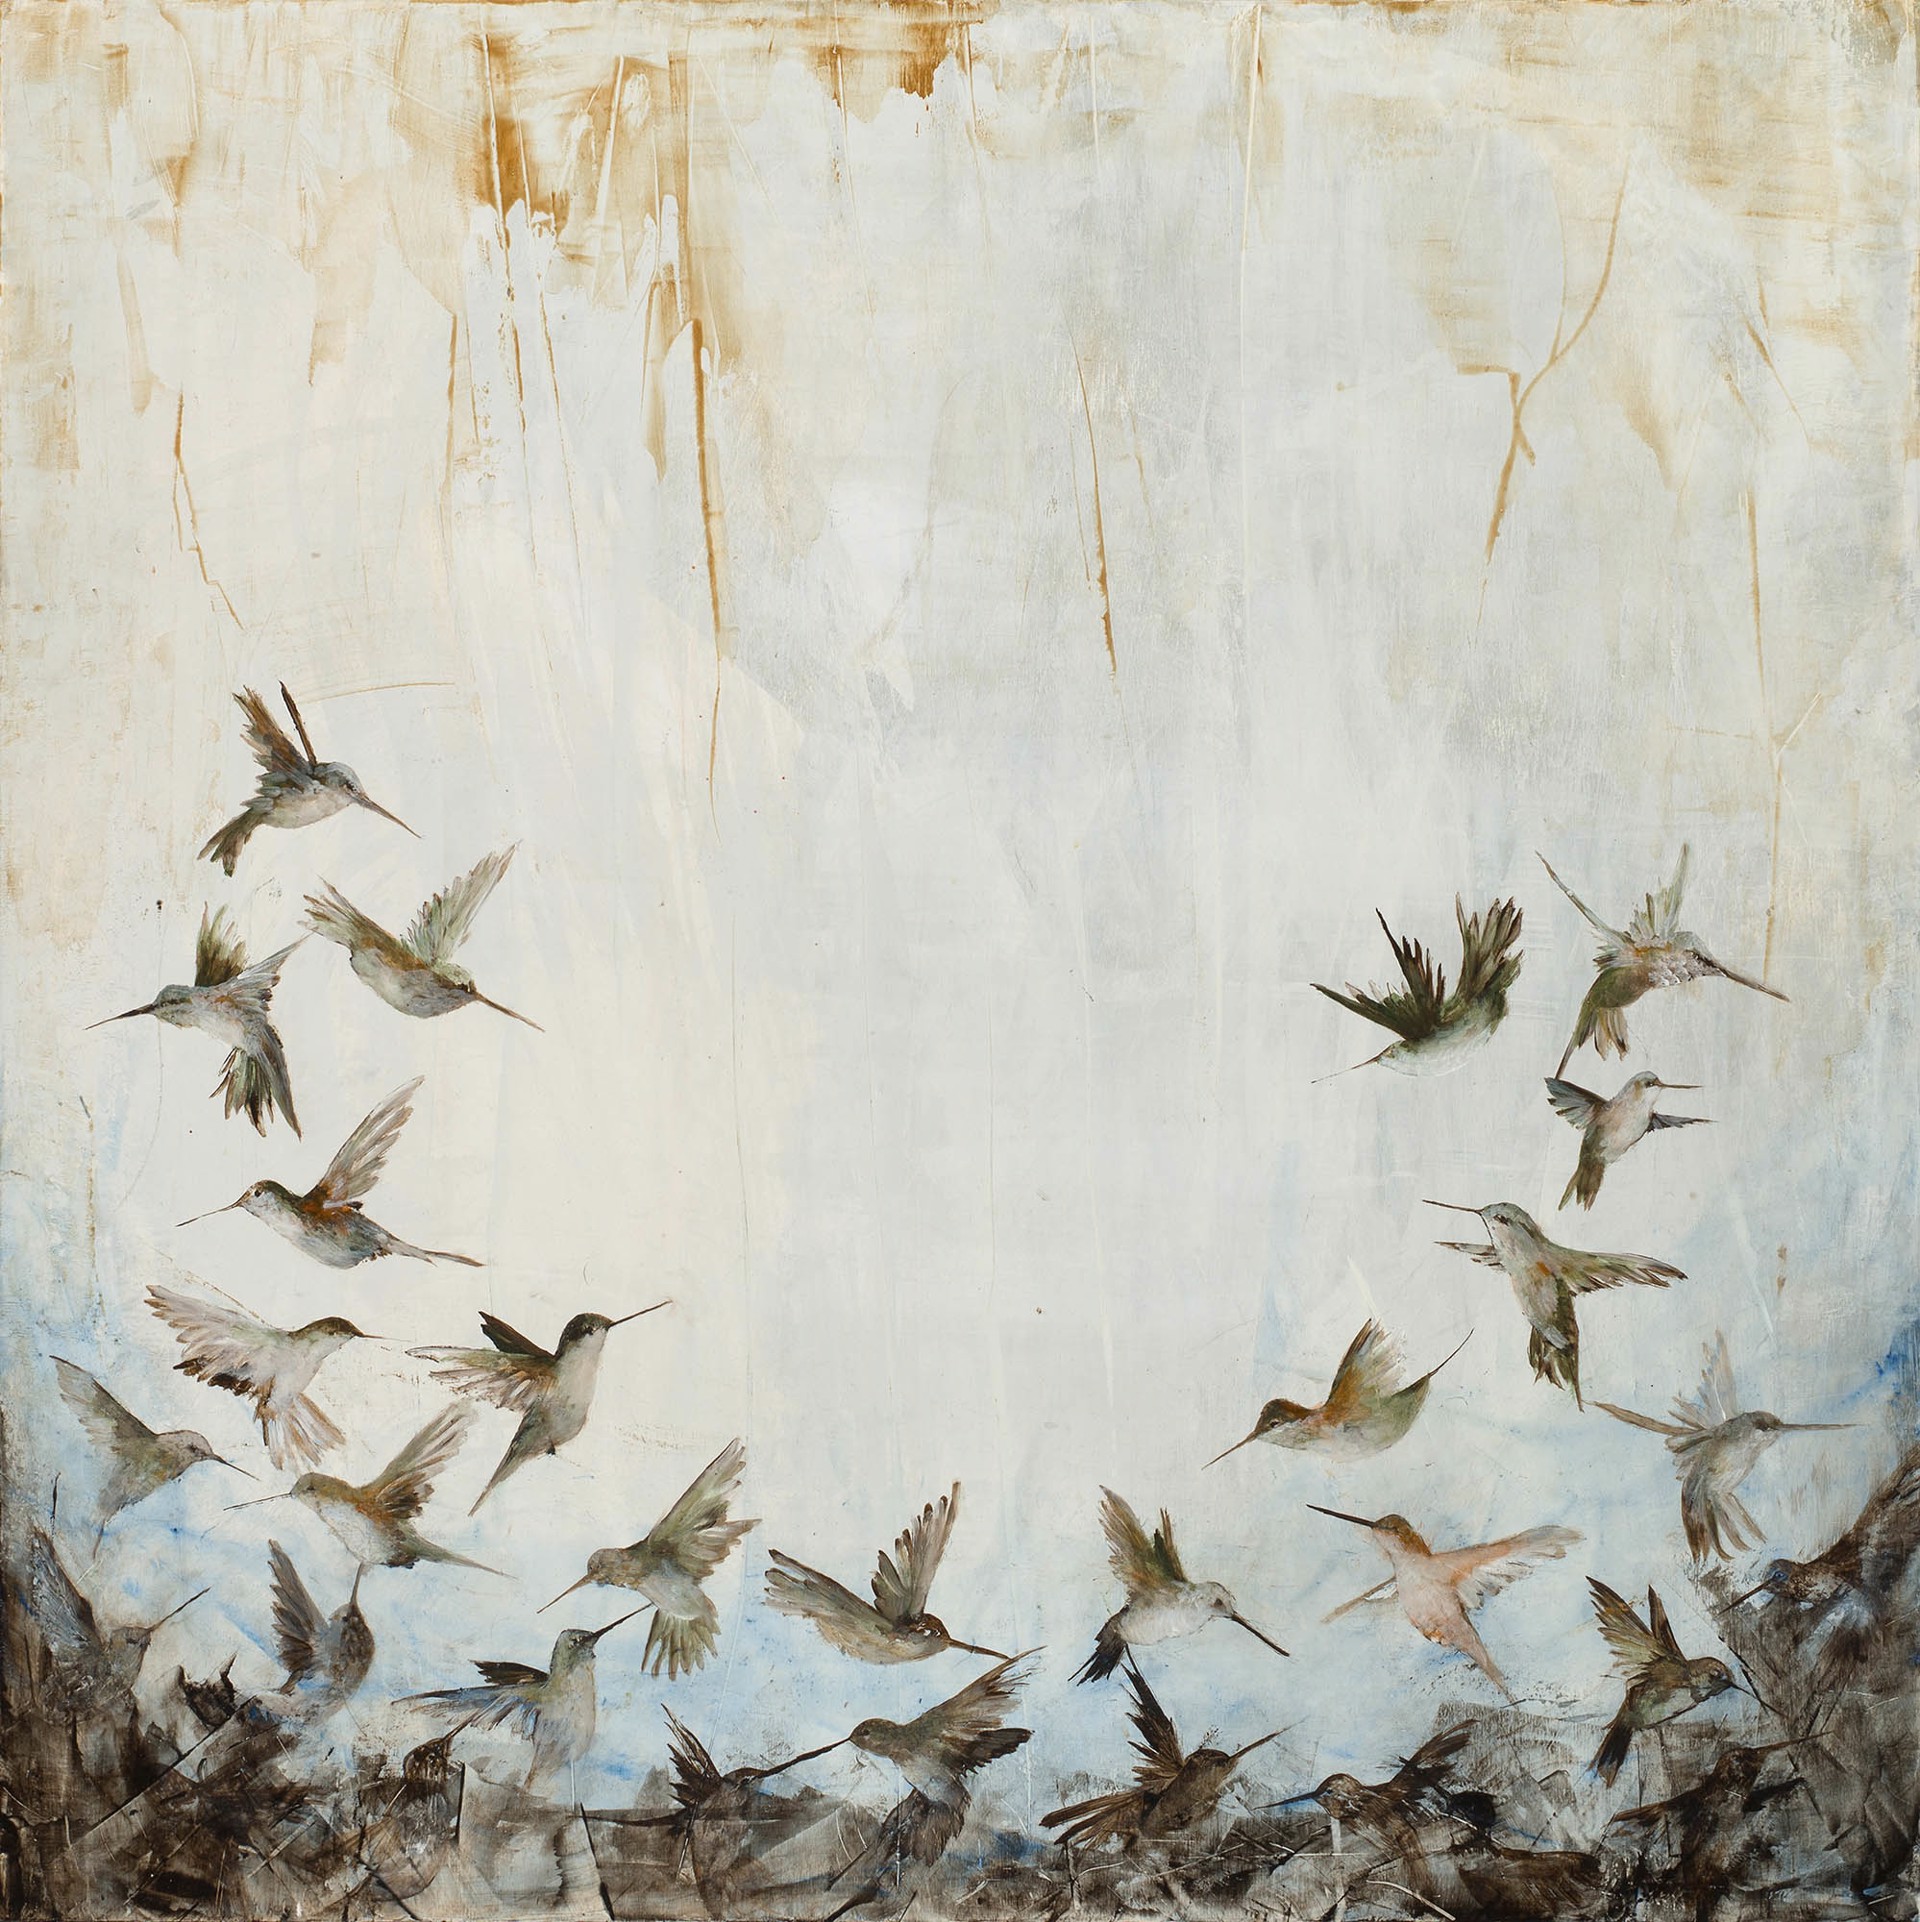 A Contemporary Painting Of Hummingbirds Gathering By Jenna Von Benedikt Available At Gallery Wild